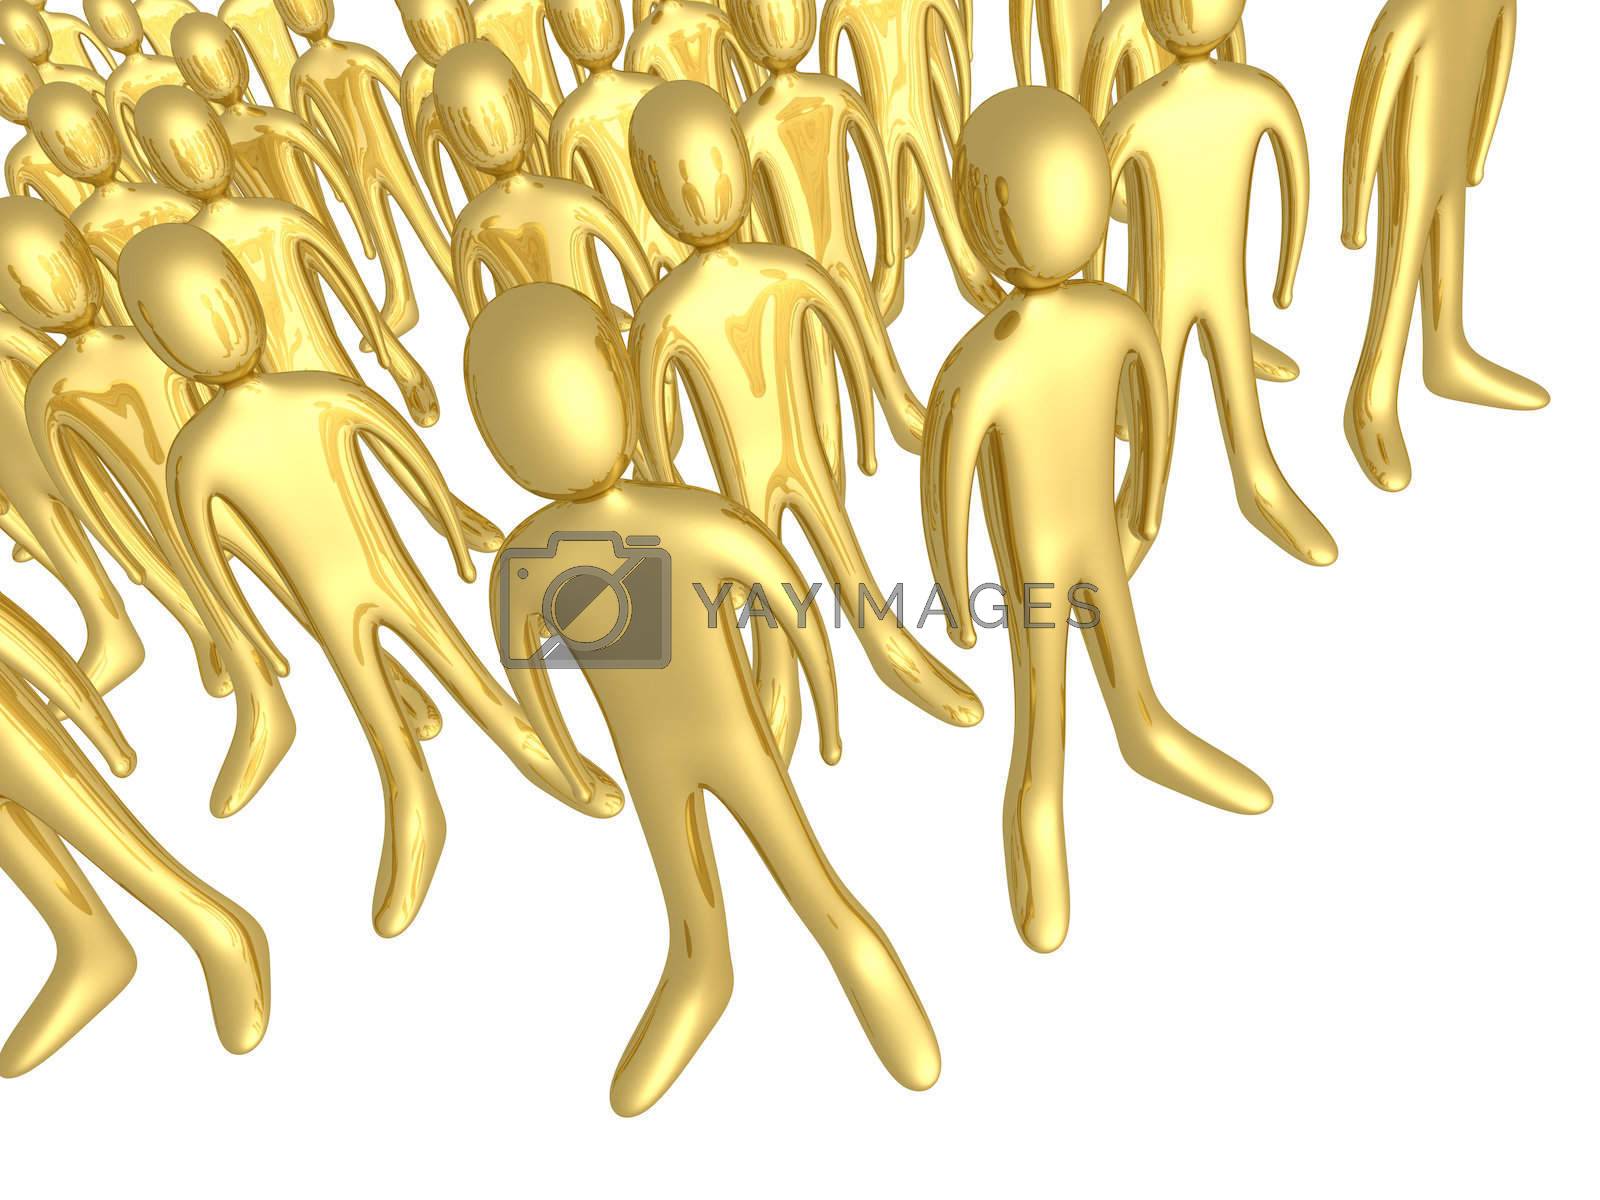 Royalty free image of Toon Crowd by 3pod